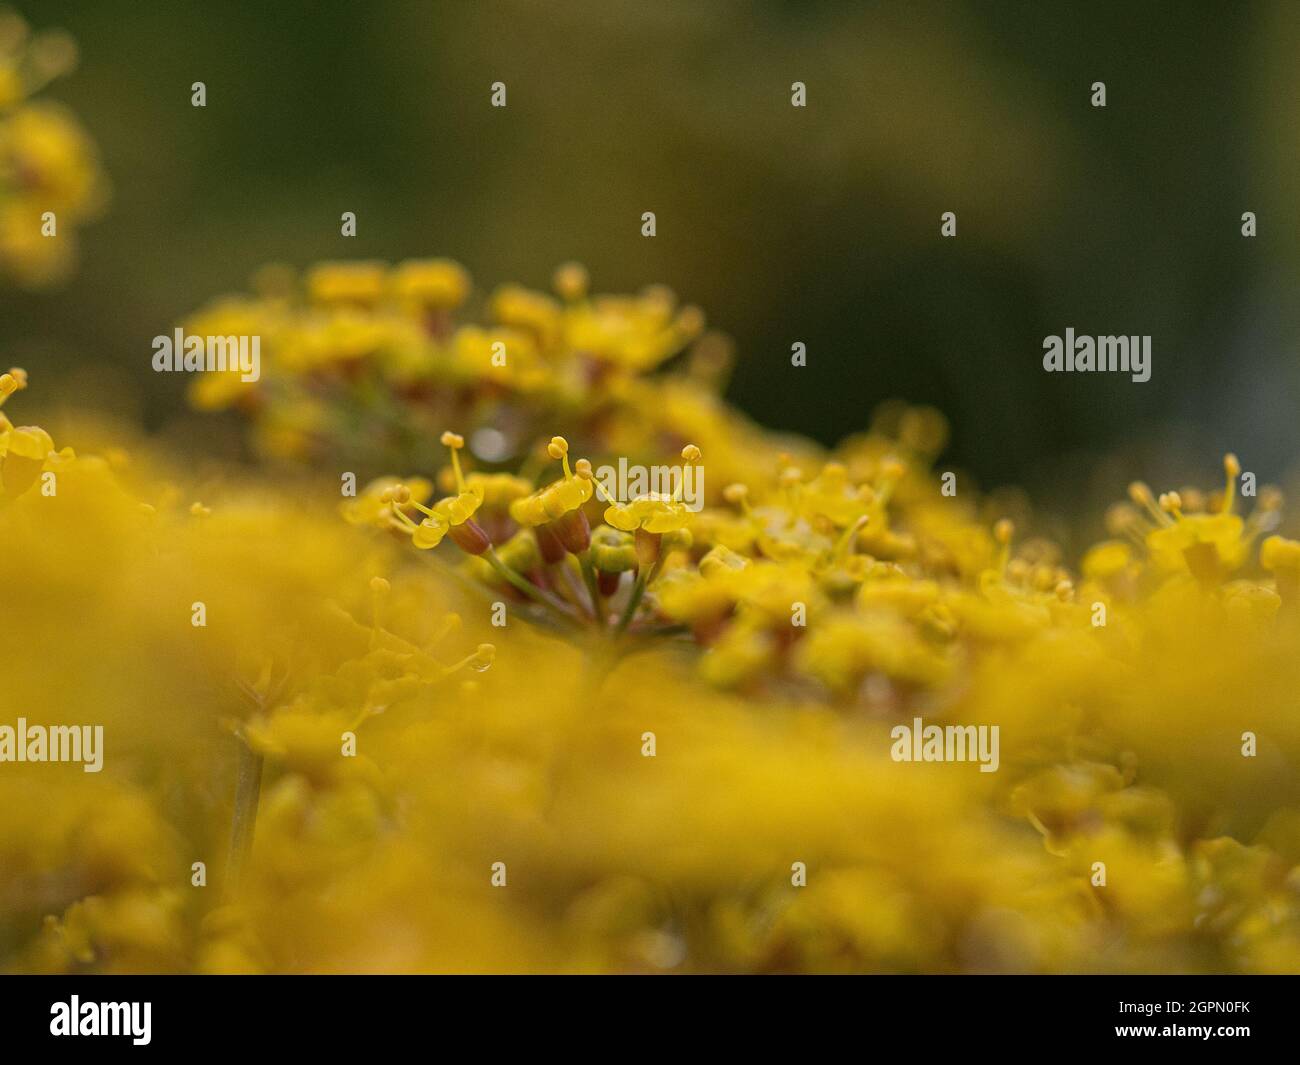 A close up of the mustard yellow florets of bronze fennel Stock Photo